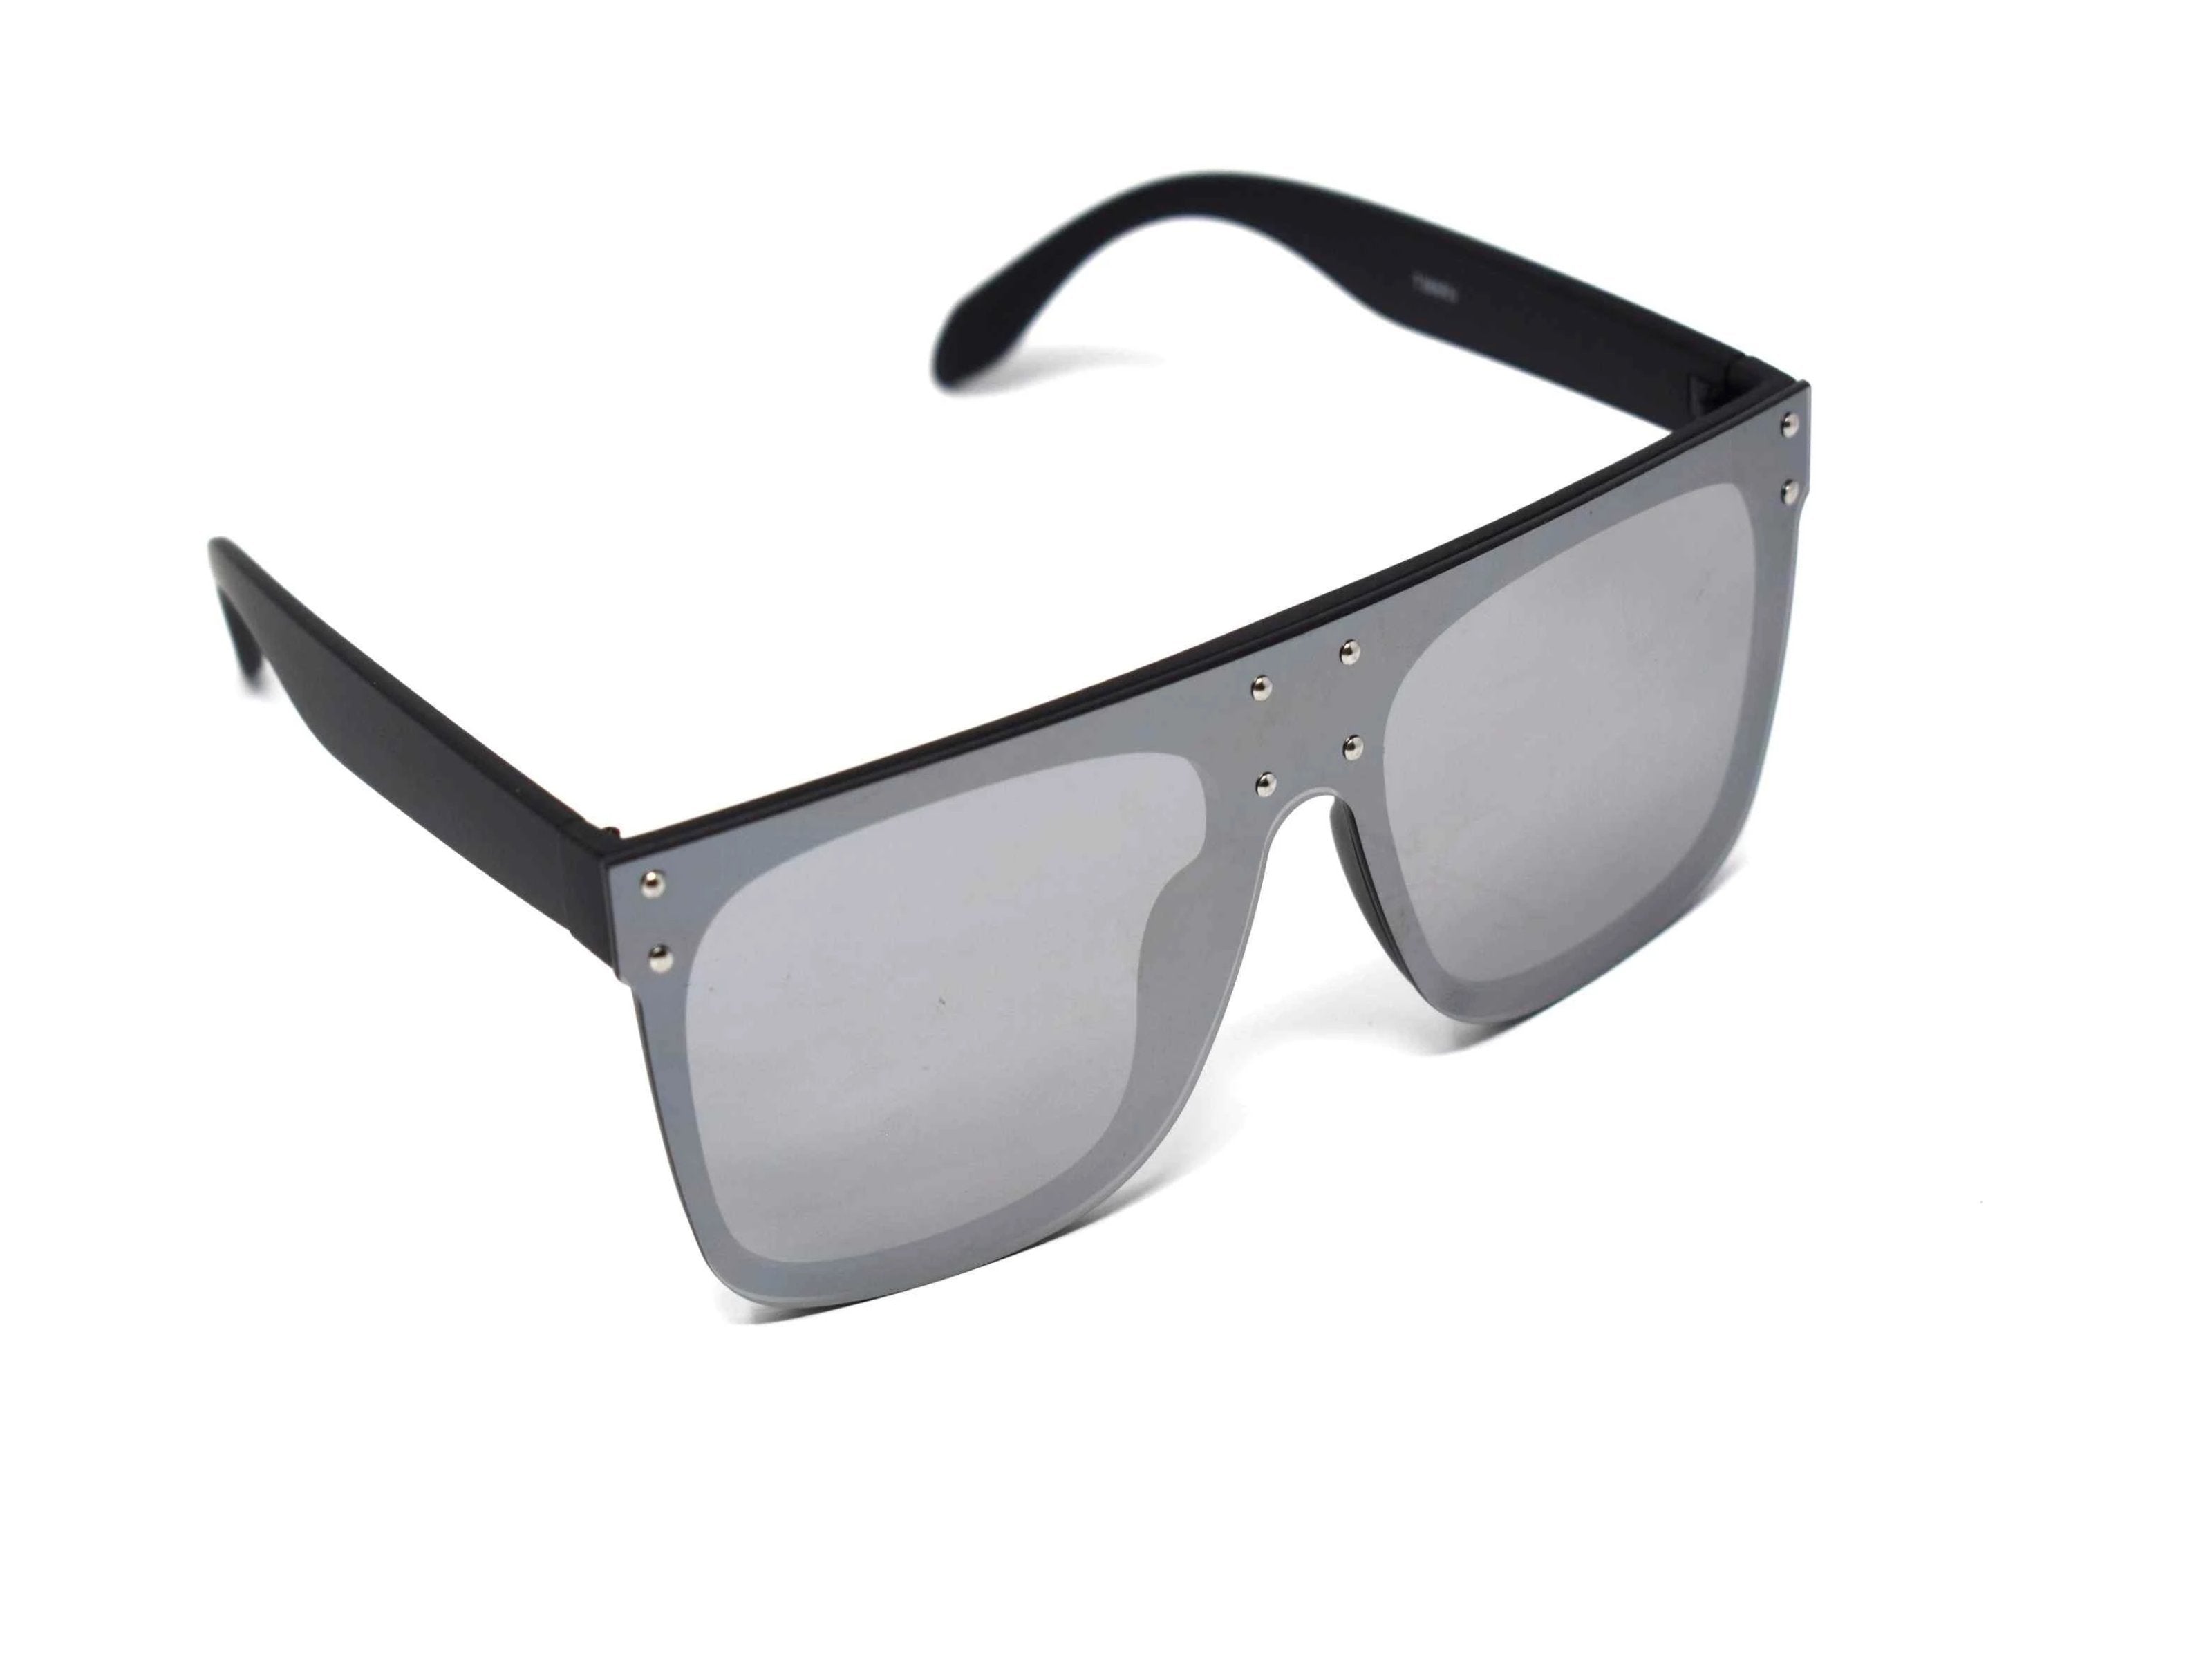 Fashion forward and edgy is what you call our shield shaped Rosa black framed silver mirrored Sunglasses.